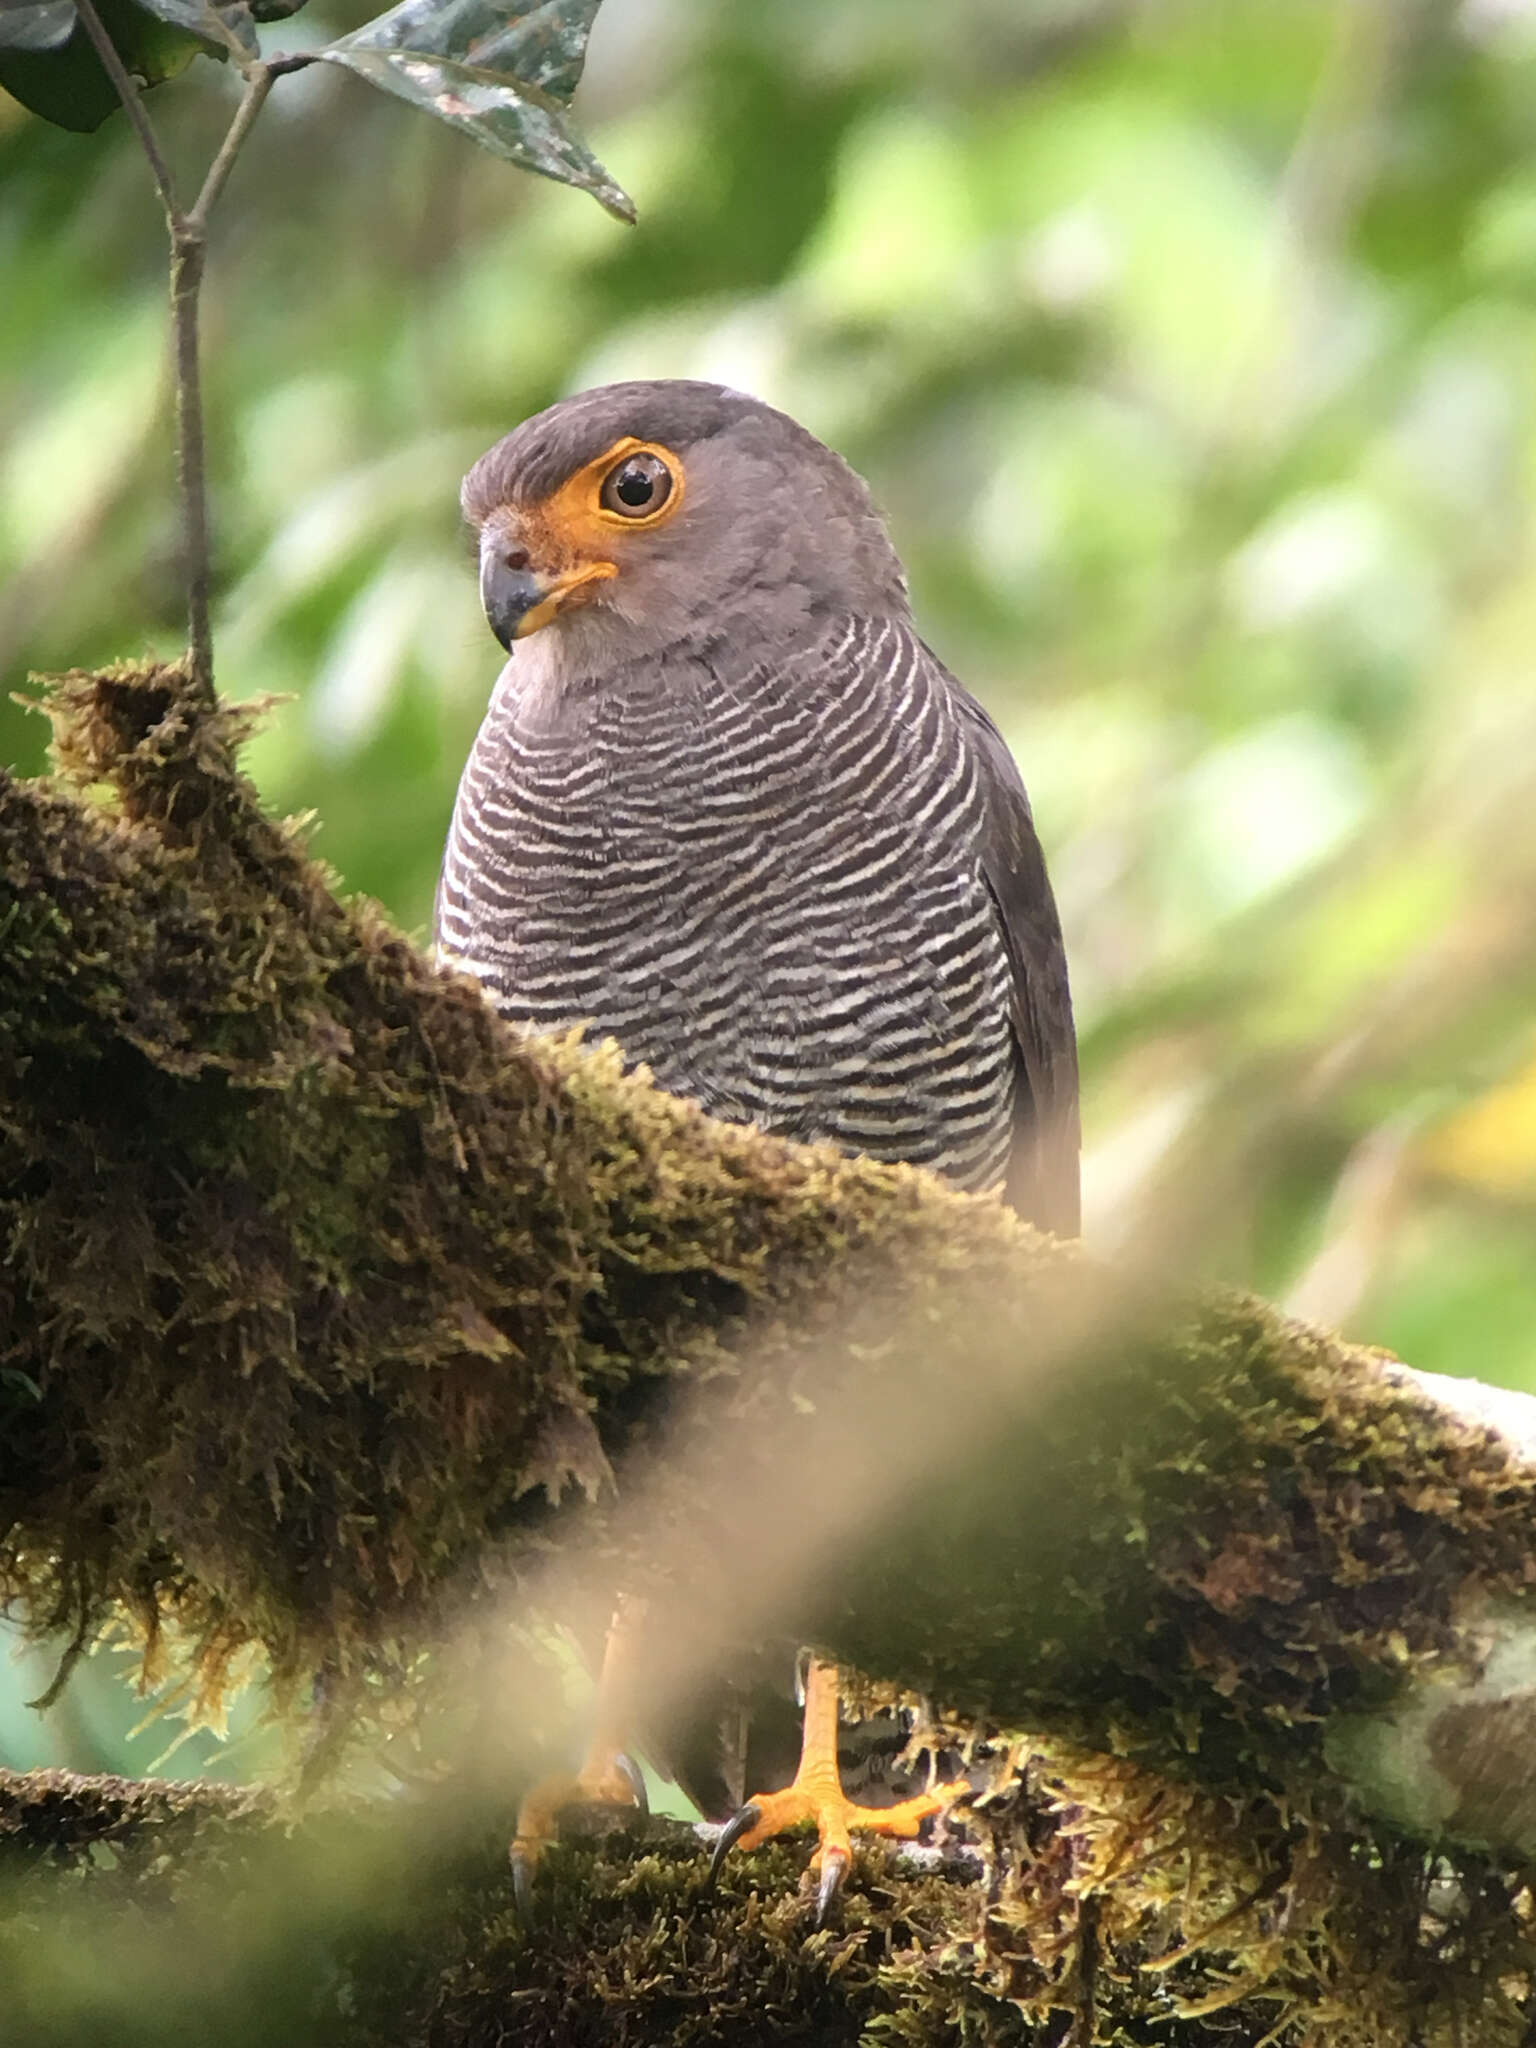 Image of Barred Forest Falcon